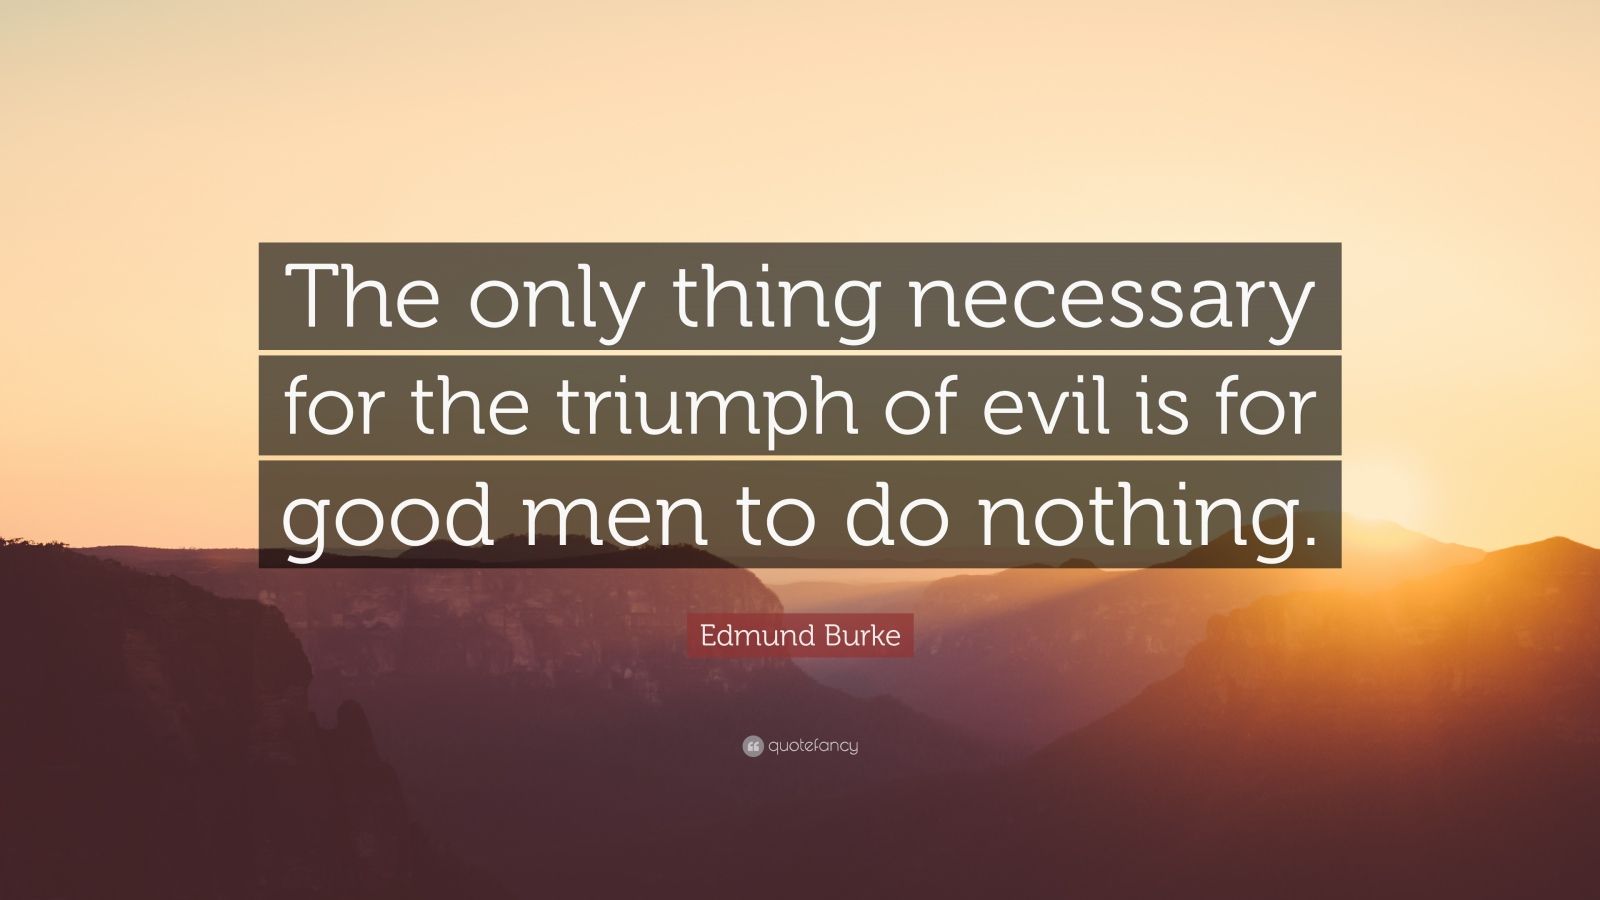 Edmund Burke Quote: “The only thing necessary for the triumph of evil